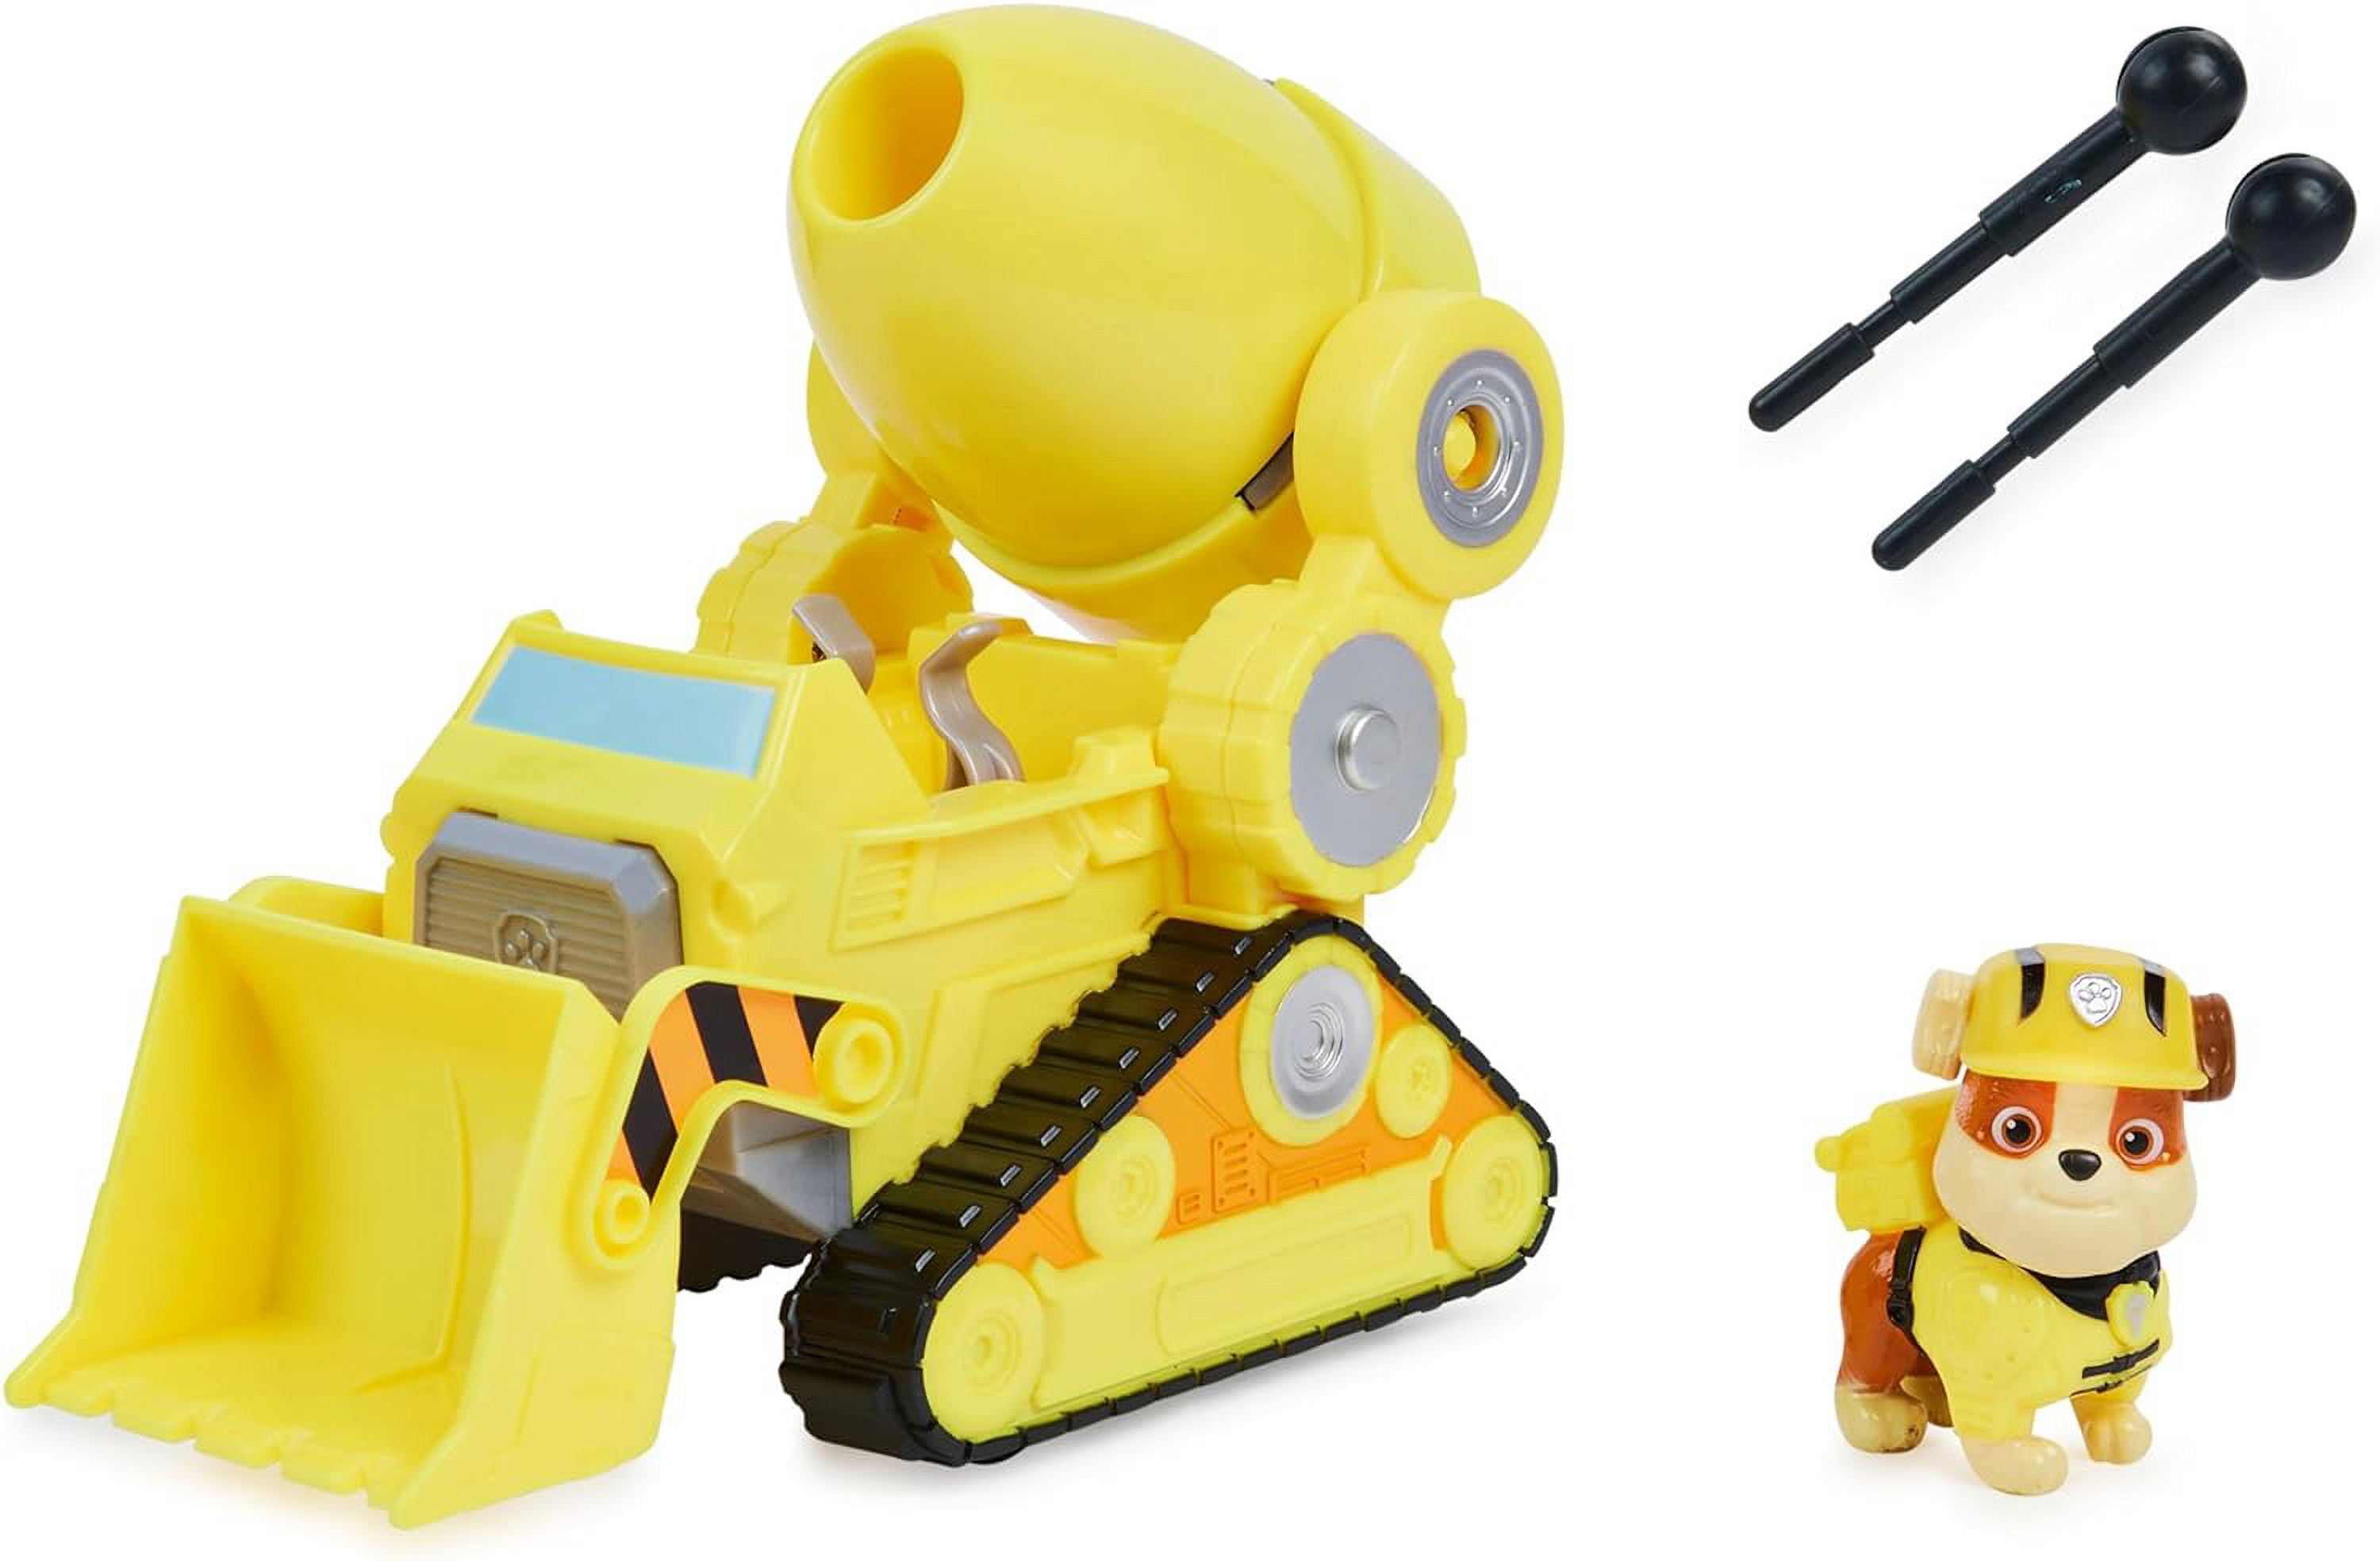  Paw Patrol Deluxe Figural Sea Rubble Figures : Toys & Games